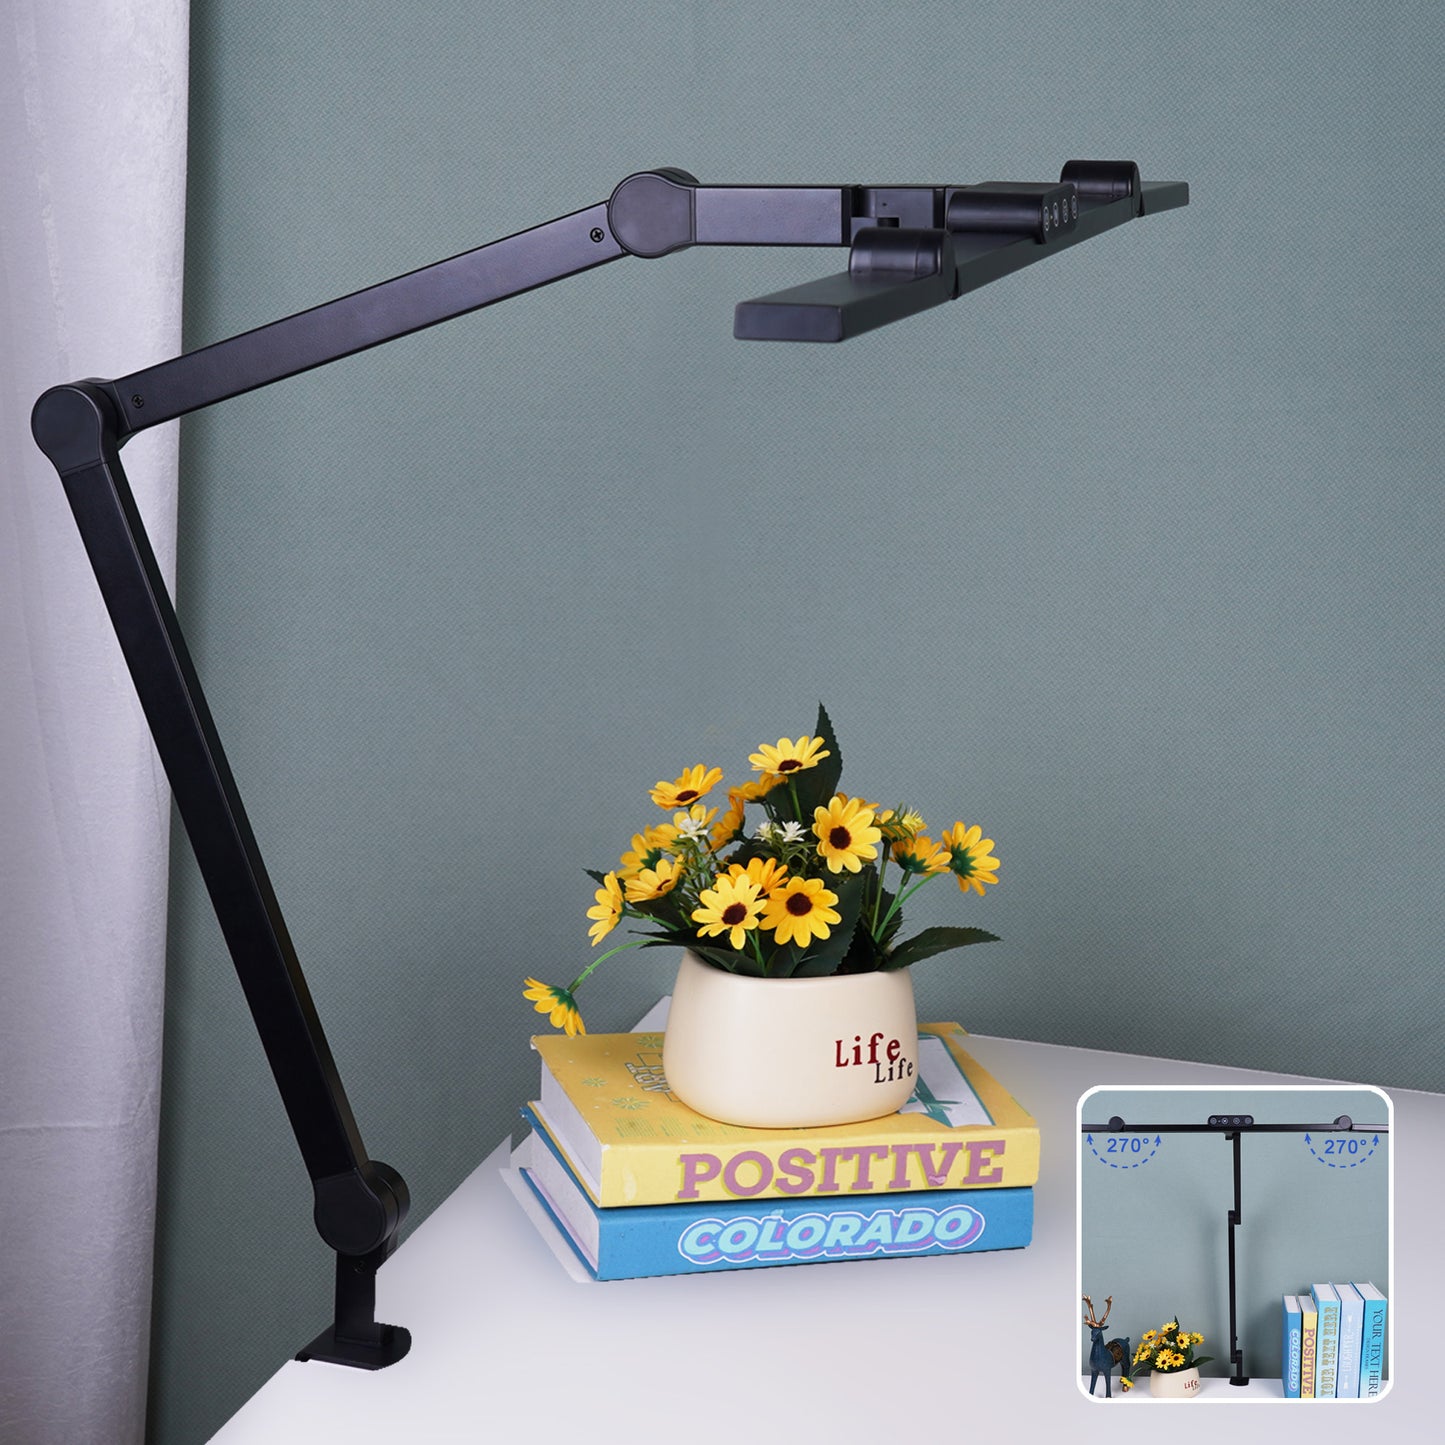 💡 Led Desk Lamp with Clamp, Architect Atmosphere Lighting Desk Lamp for Home Office, 24W Ultra Bright Auto Dimming Desk Light Stepless Dimming and Tempering LED Table Lamp